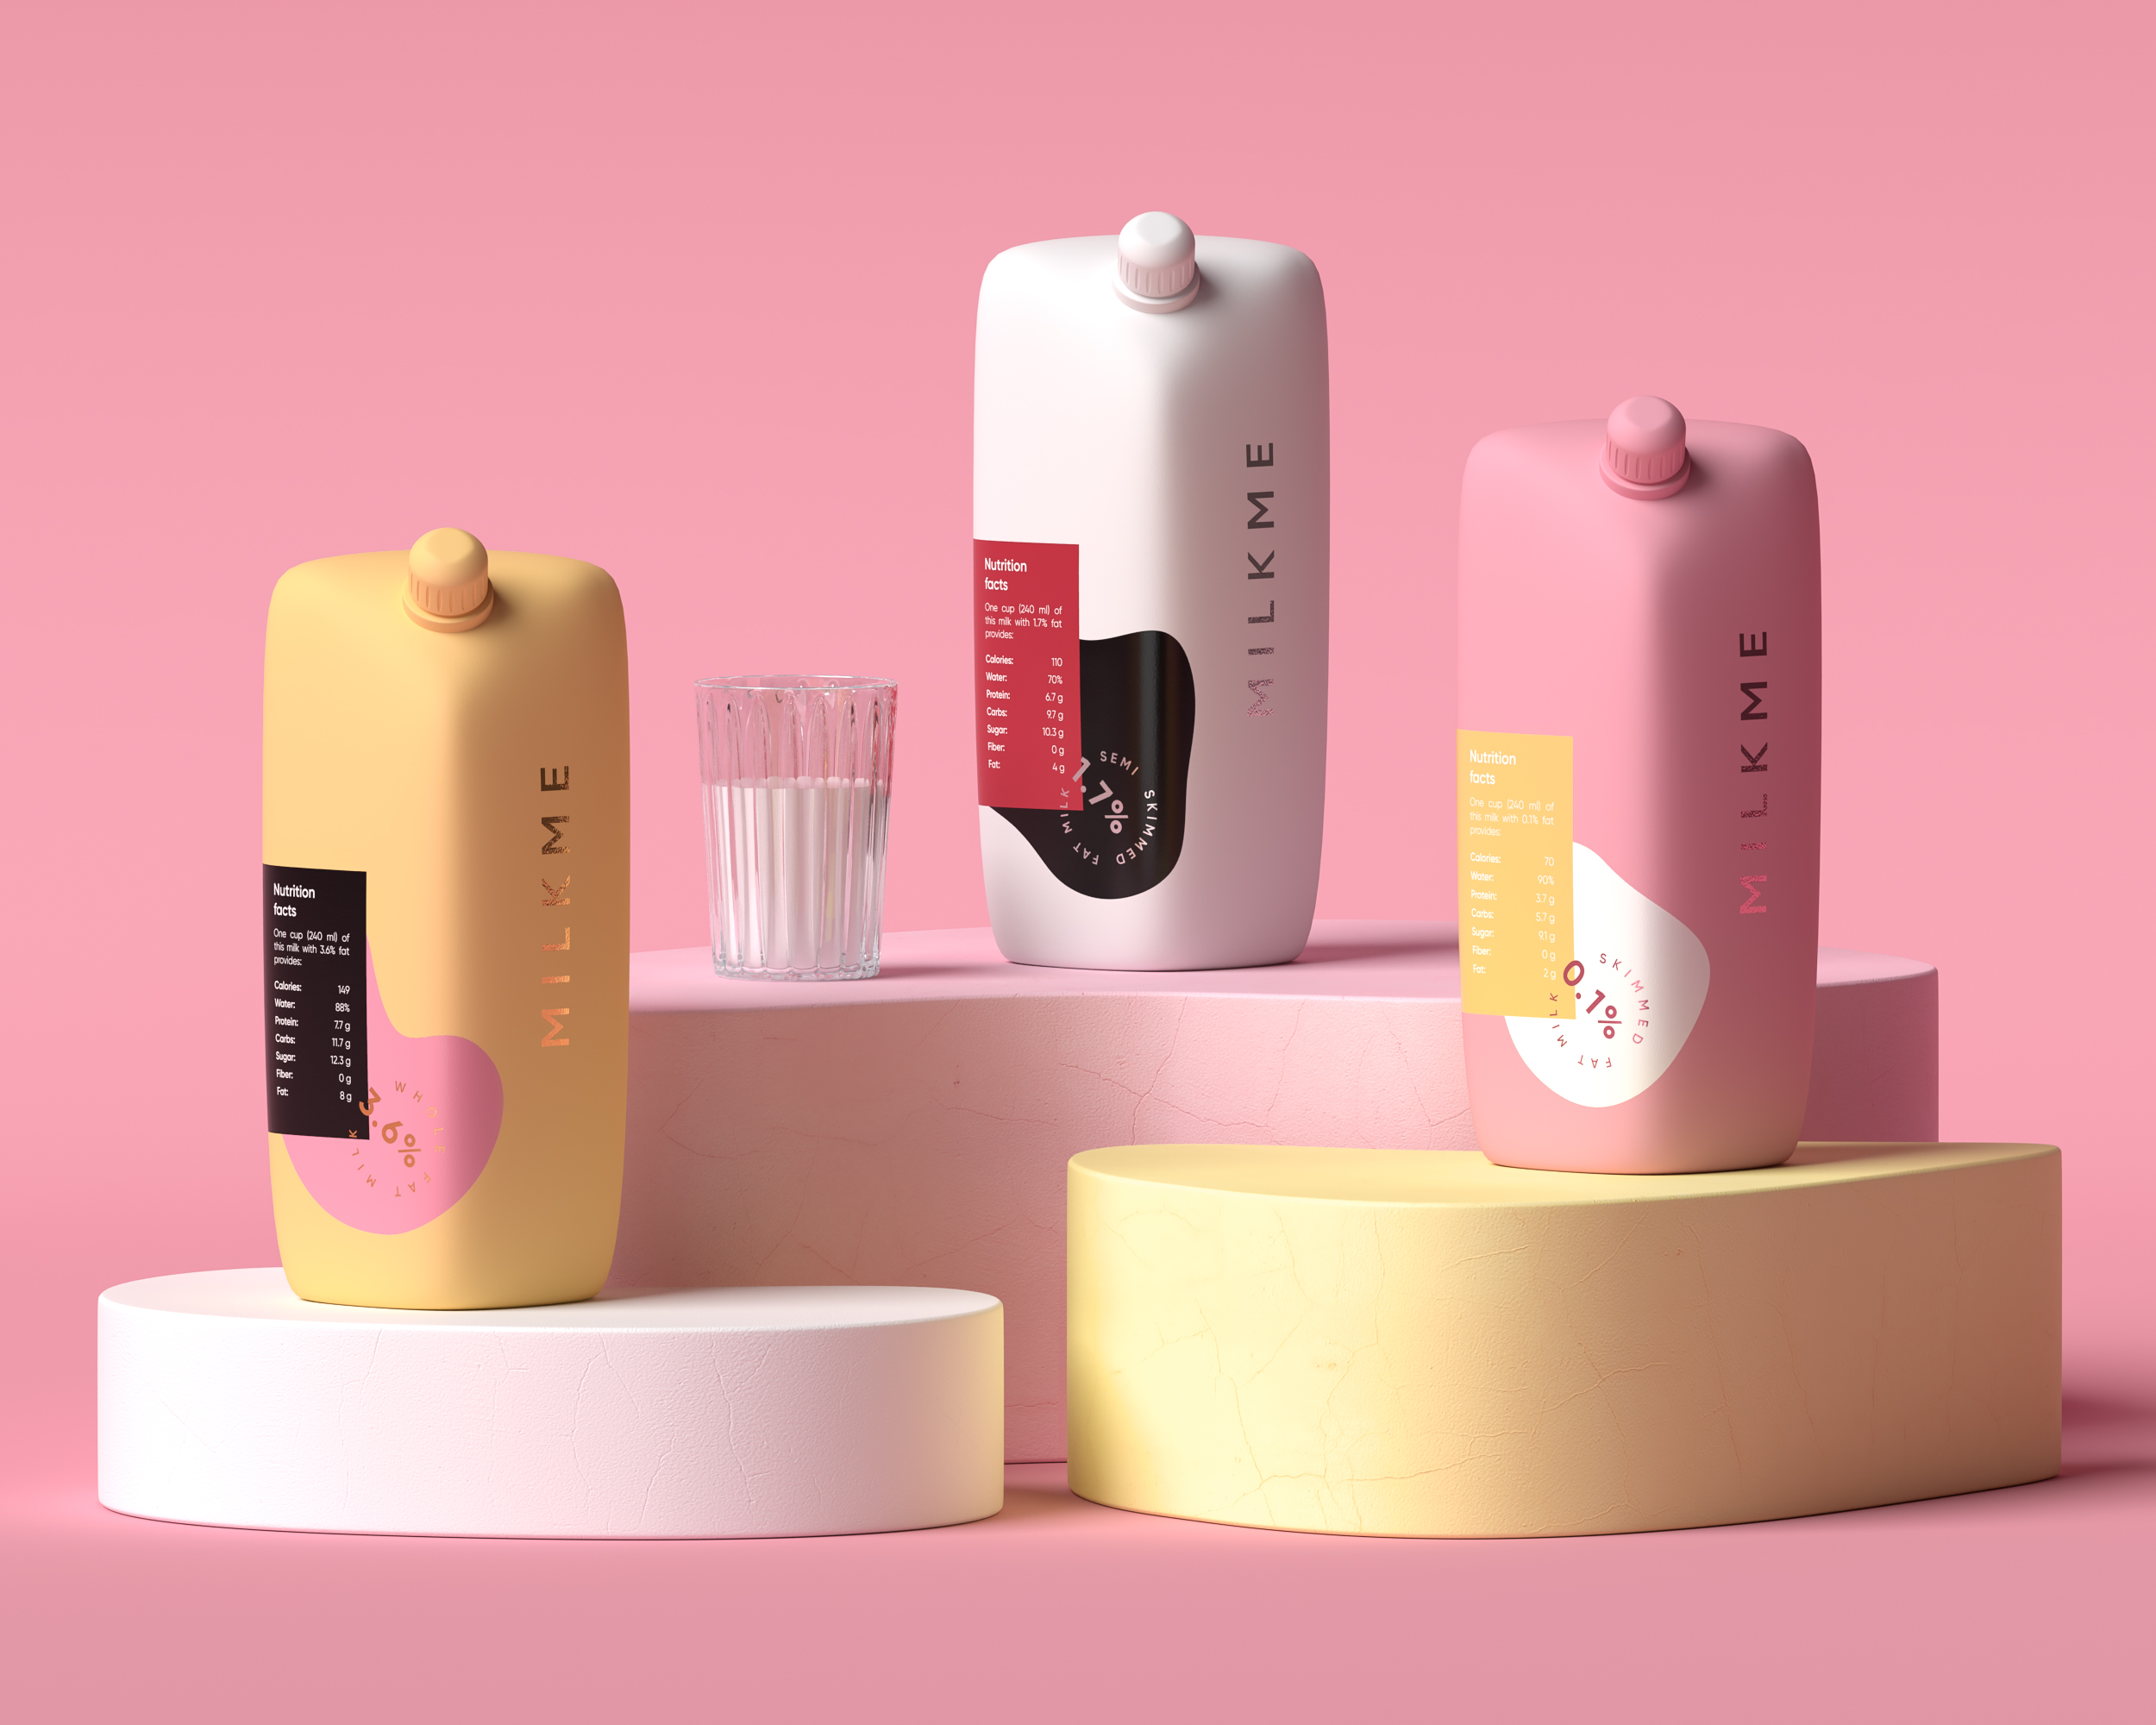 Naming, Concept Design and Visual Language for MILKME Milk Products